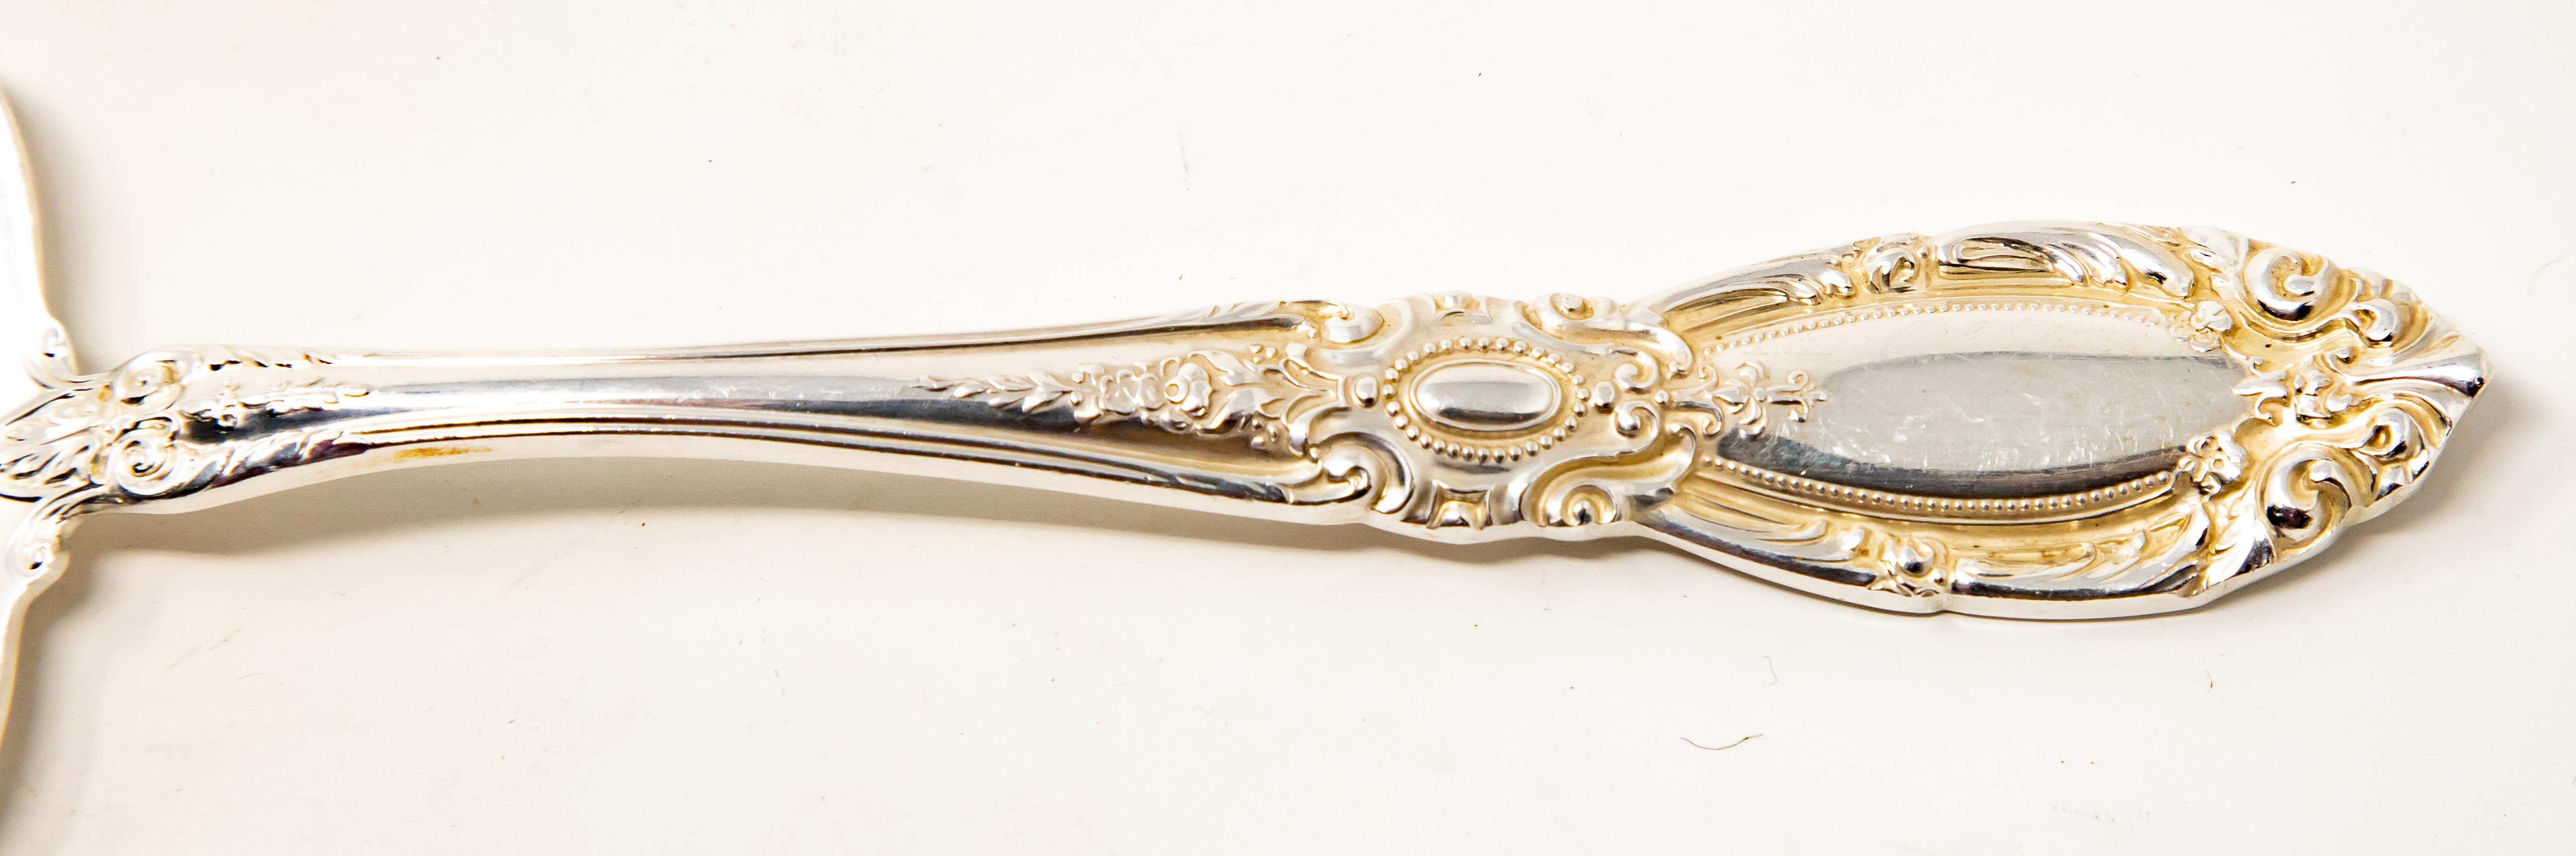 Offering this stunning Towle sterling silver serving spoon. This is the King Richard pattern. Open scrollwork grace the bowl of this spoon. The back of the handle is marked Towle Sterling.